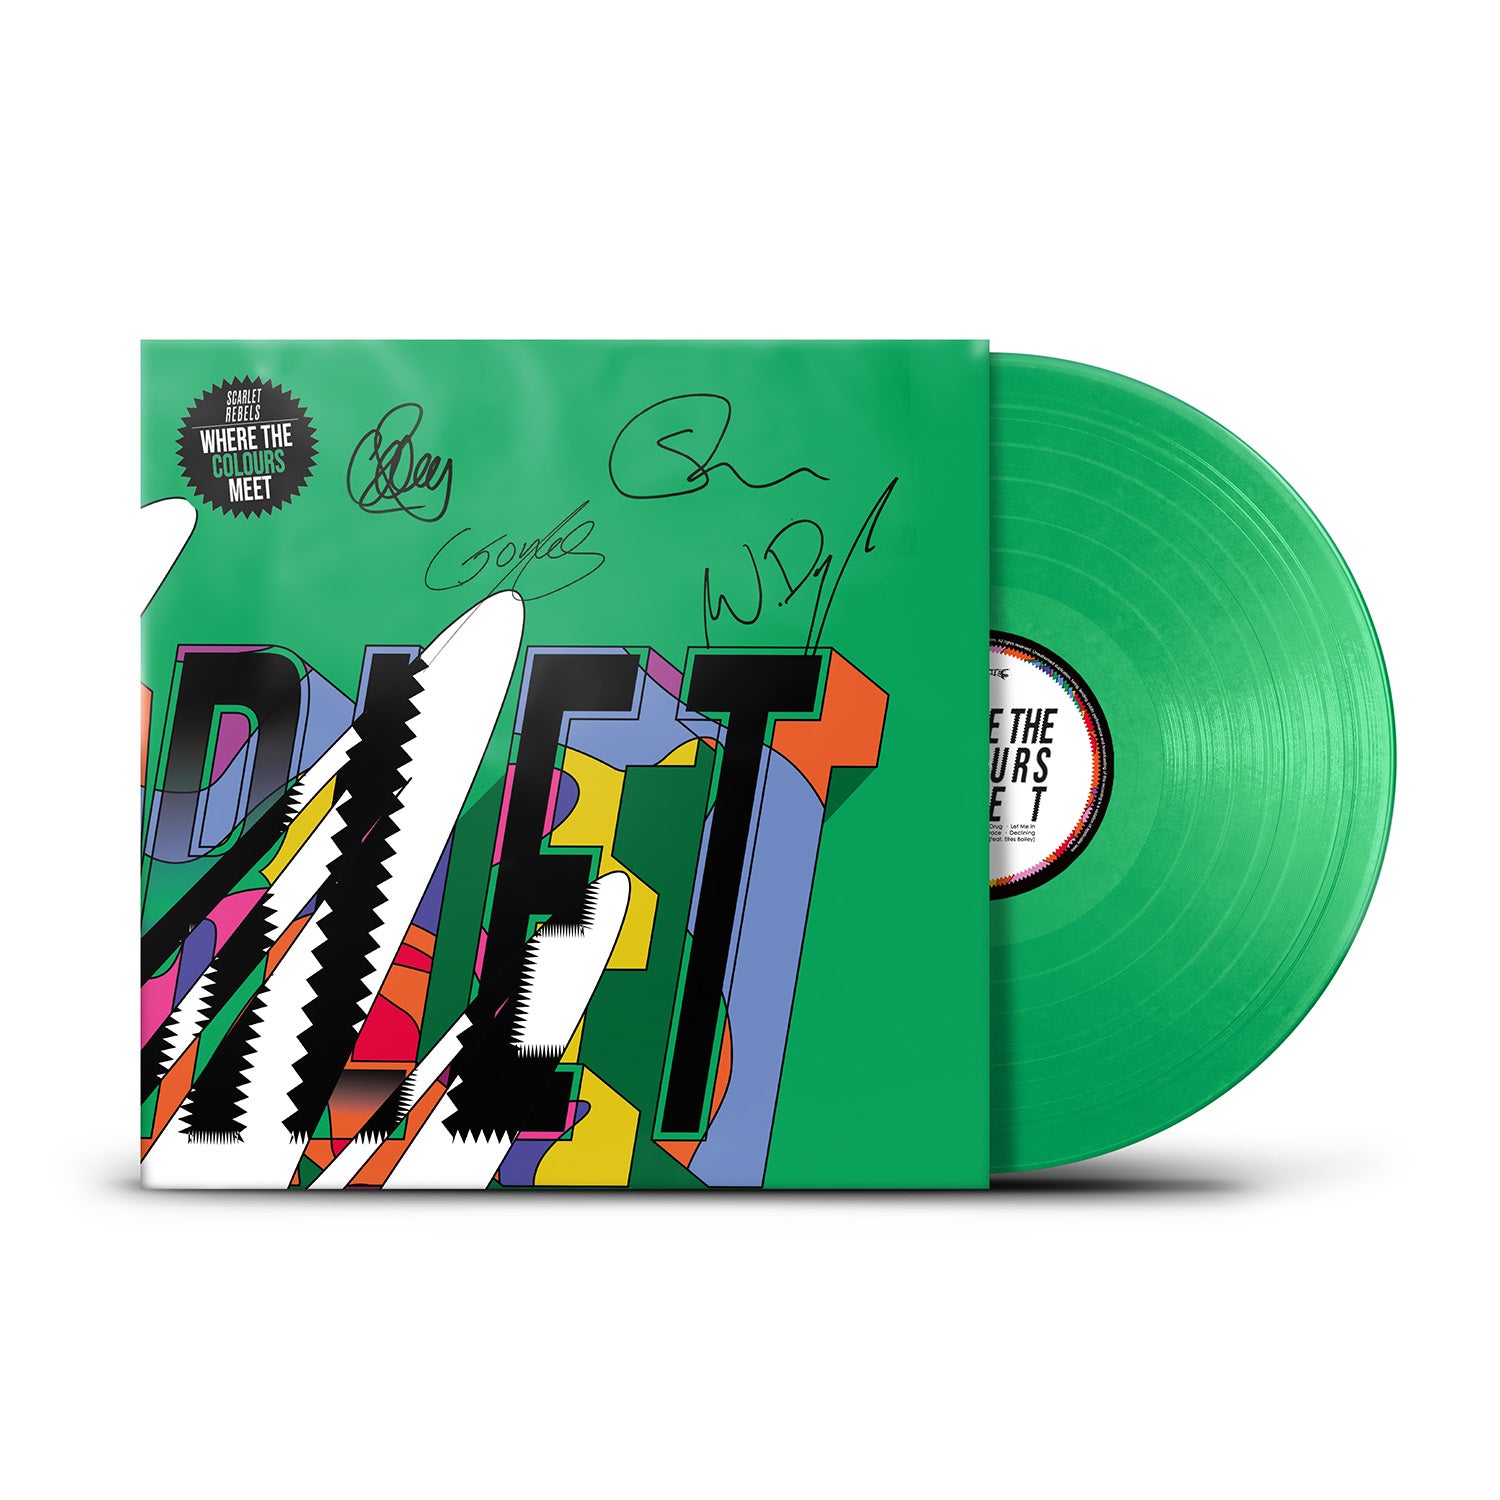 Scarlet Rebels "Where The Colours Meet" SIGNED Green Vinyl & Download - PRE-ORDER